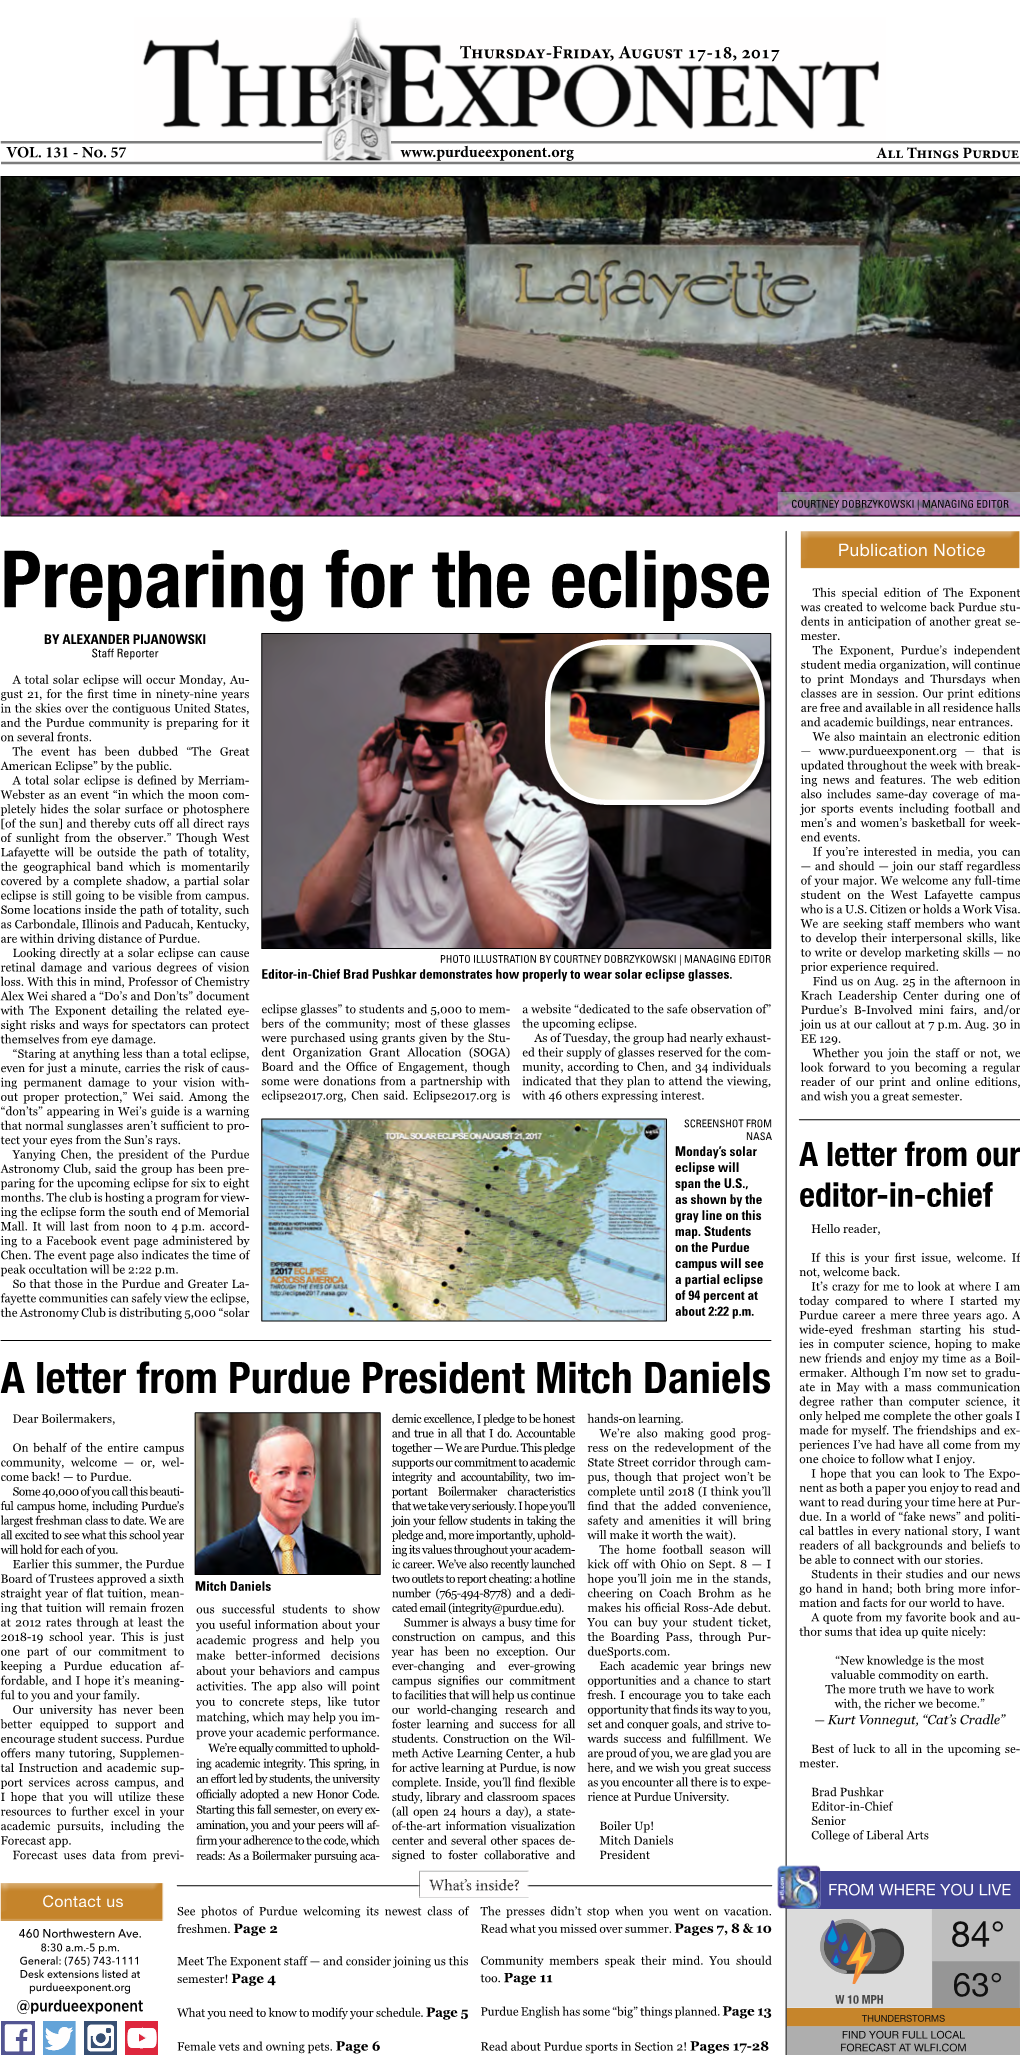 Preparing for the Eclipse Was Created to Welcome Back Purdue Stu- Dents in Anticipation of Another Great Se- by ALEXANDER PIJANOWSKI Mester